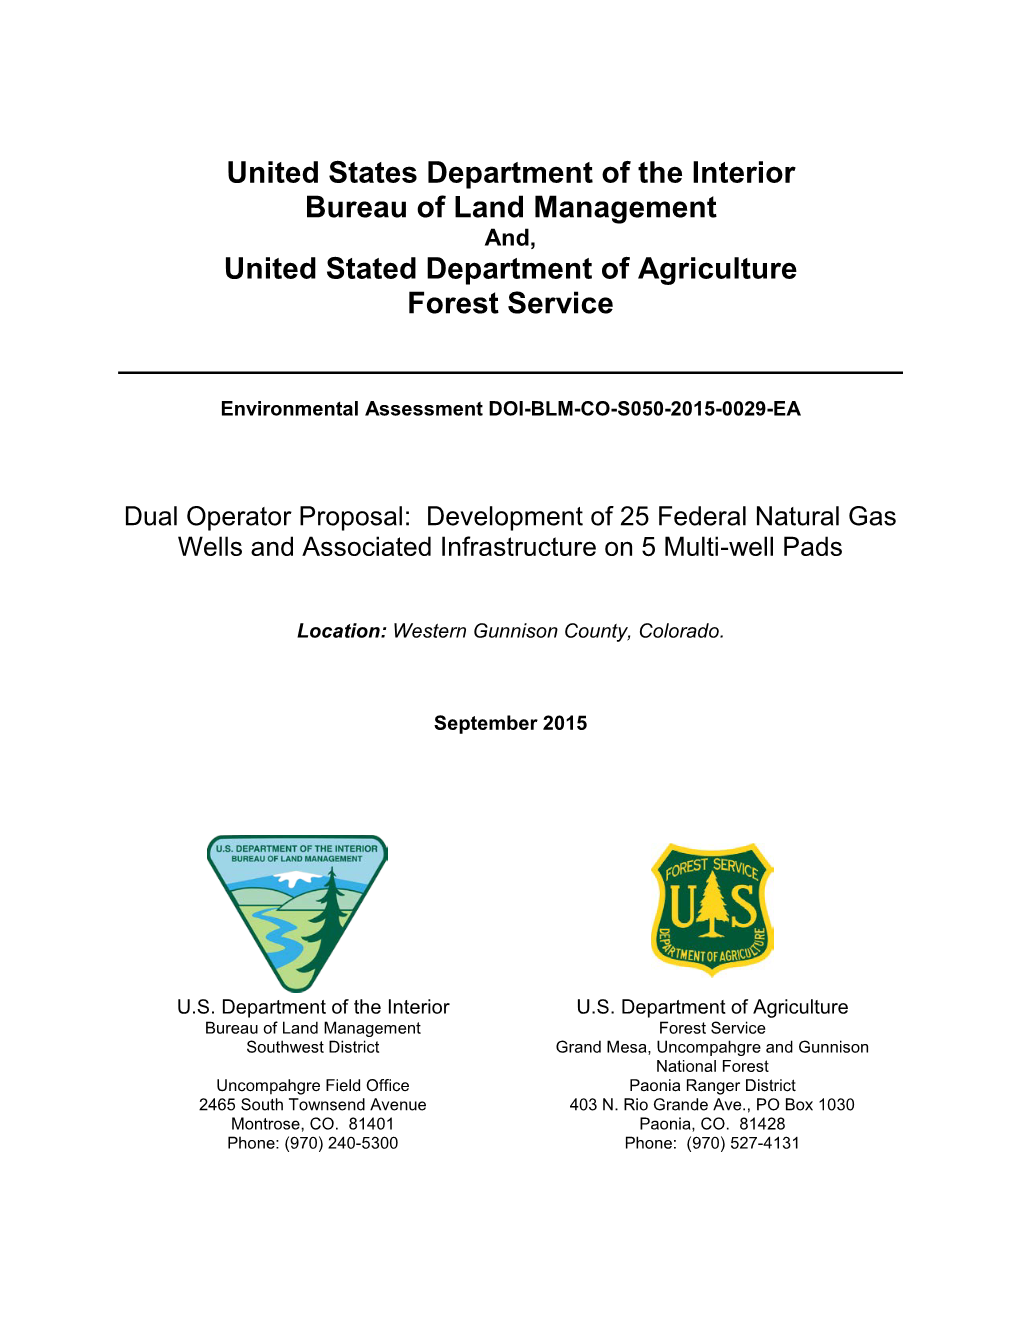 United Stated Department of Agriculture Forest Service